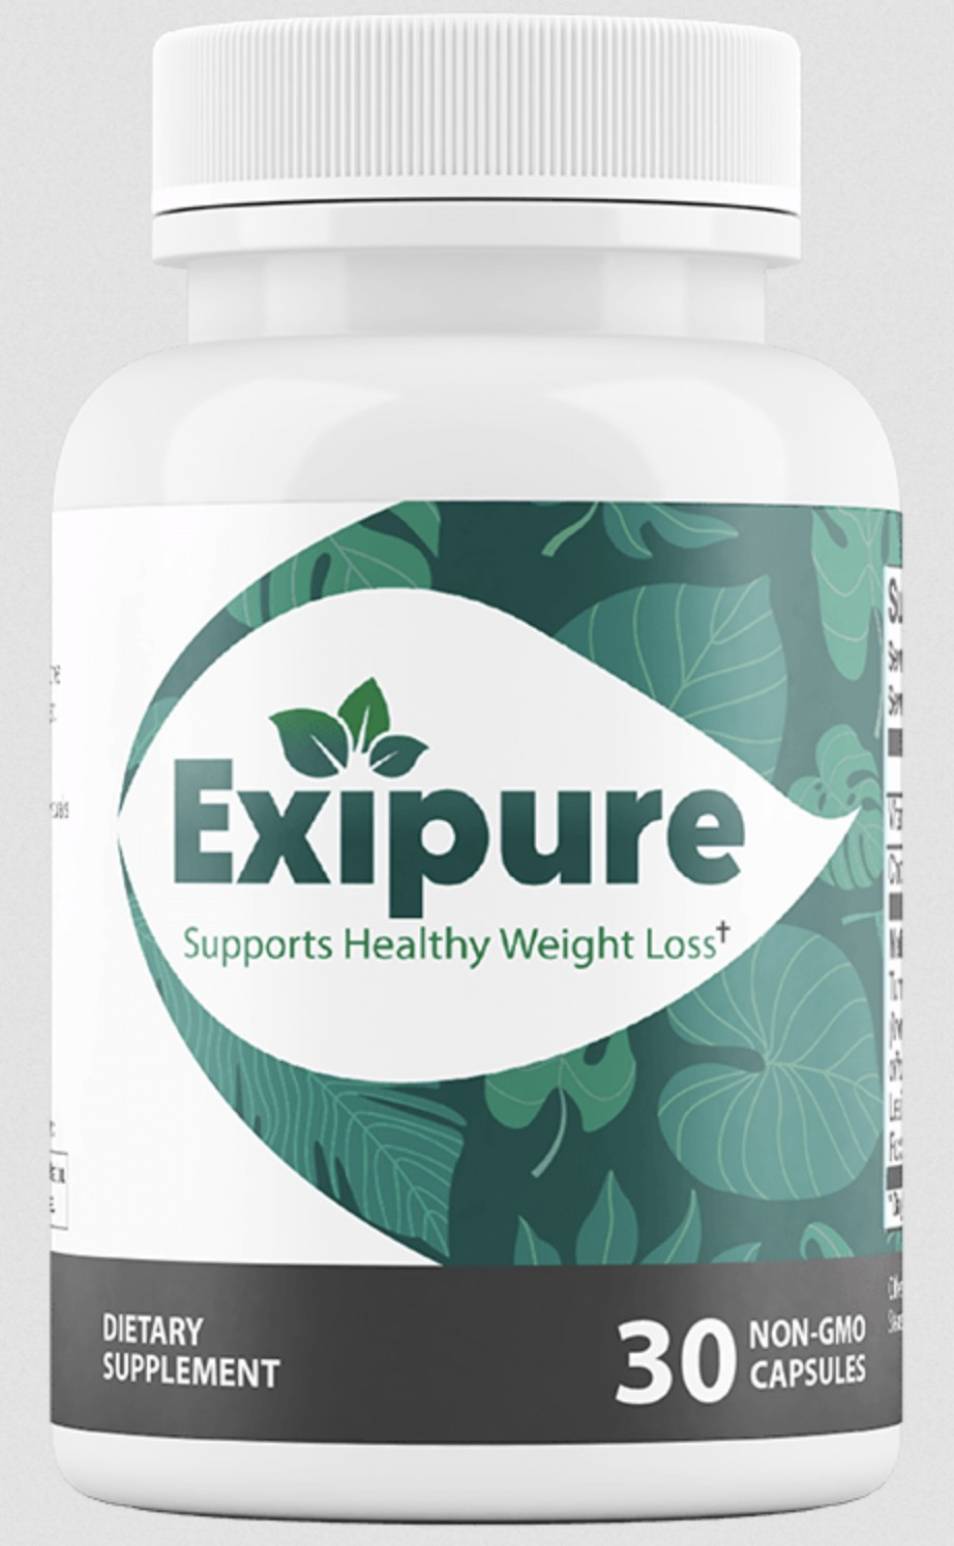 Exipure side effects in your body